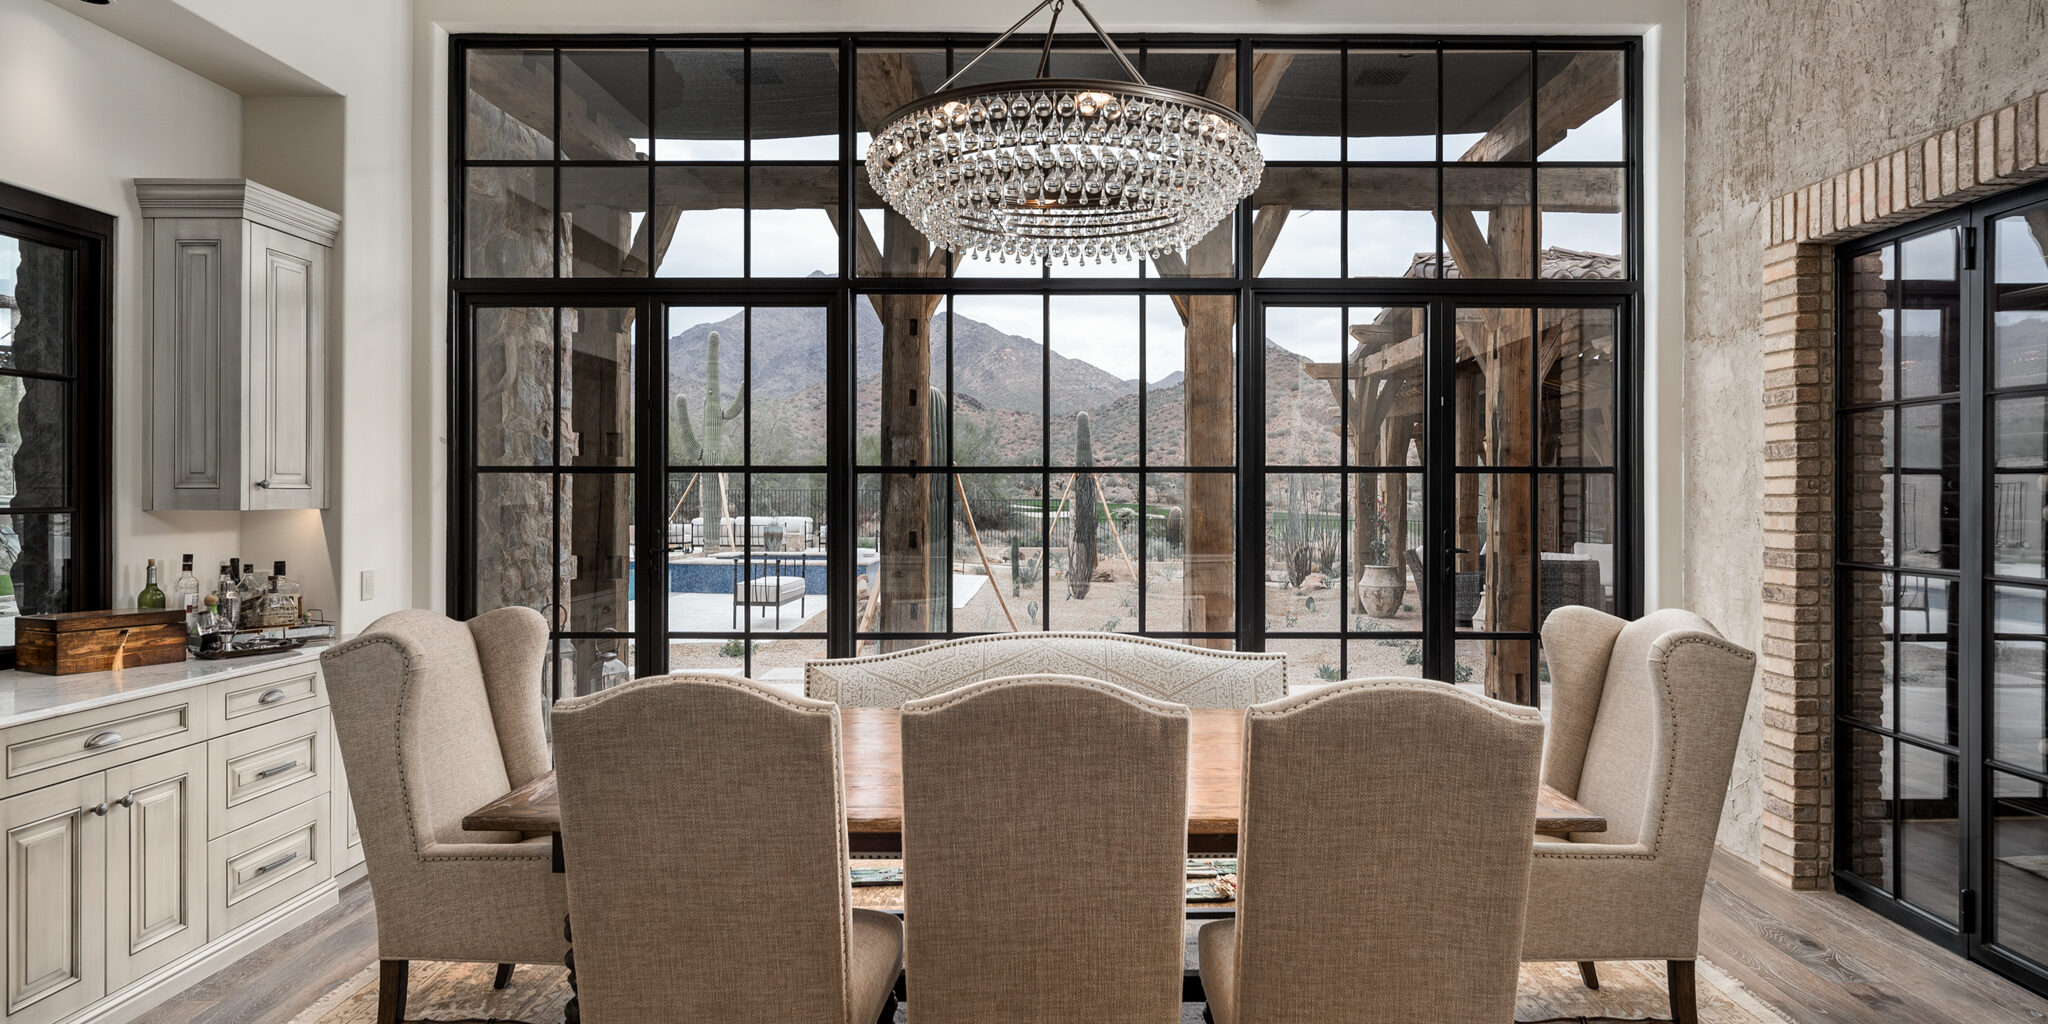 A beautifully designed dining room featuring a large rectangular wooden table surrounded by upholstered high-back chairs. The room has a rustic charm with exposed wooden beams on the ceiling and a large, elegant chandelier hanging above the table. The back wall is composed of expansive floor-to-ceiling windows with black frames, providing a stunning view of the outdoor scenery and mountains. The room is further enhanced by a vintage-style area rug and light wood flooring. Adjacent to the dining area, built-in cabinetry provides additional storage and complements the overall aesthetic. The natural light and open layout create a warm and inviting atmosphere.